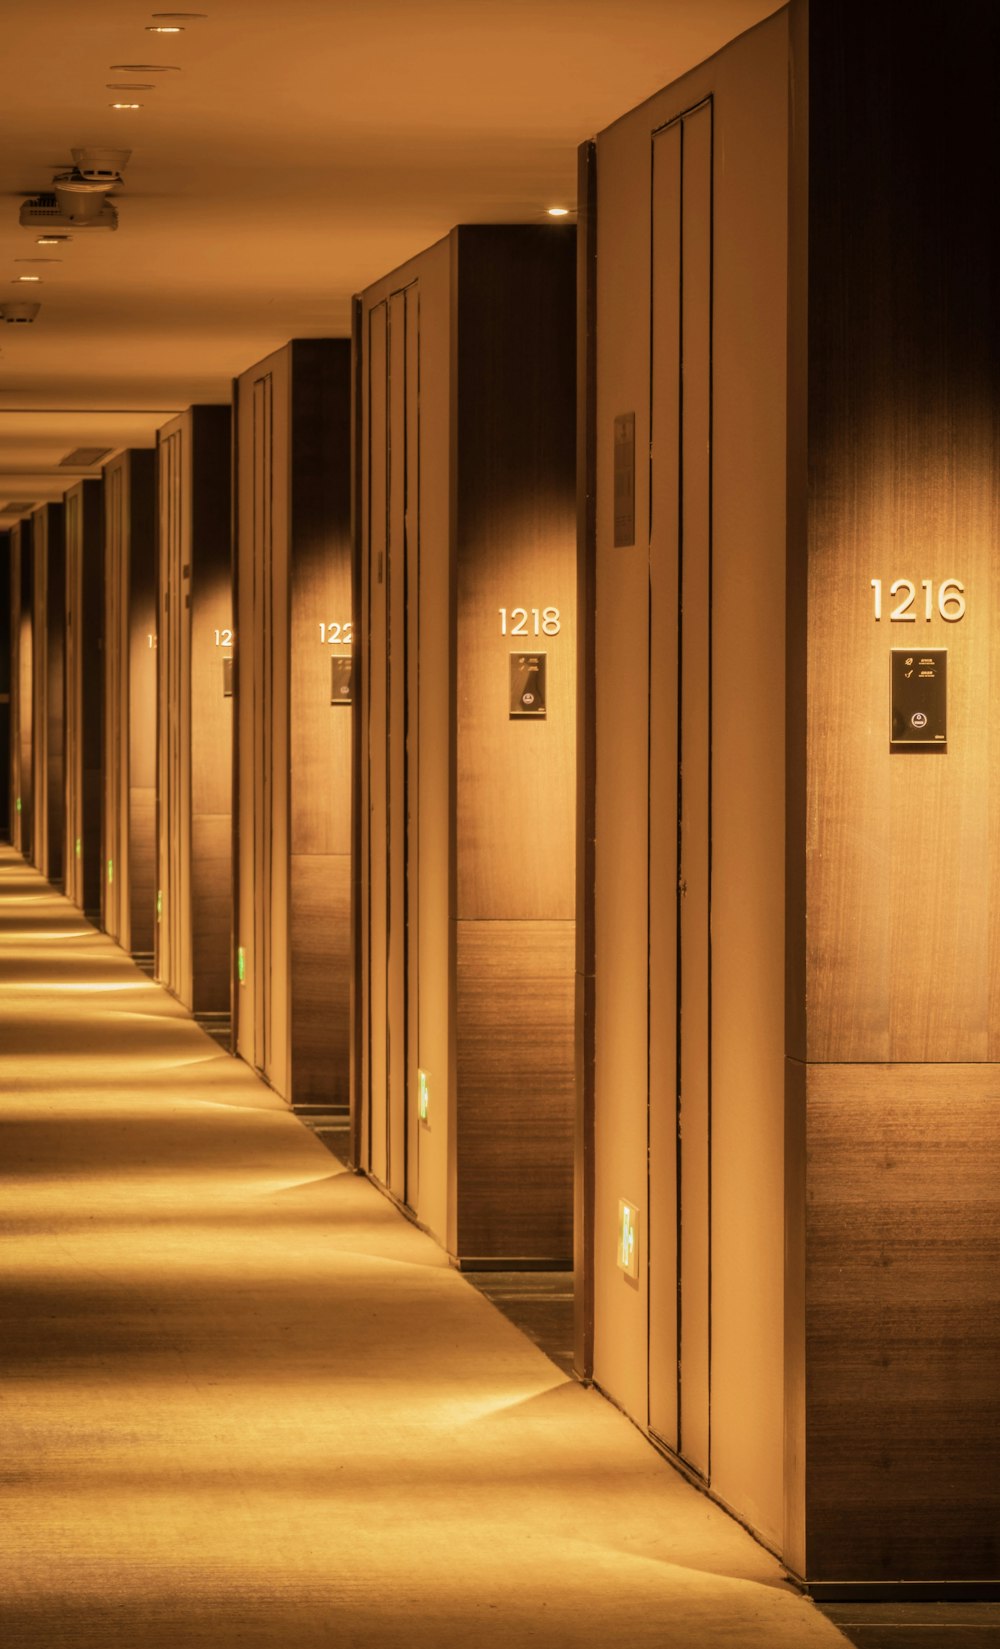 a row of doors in a hallway with numbers on them